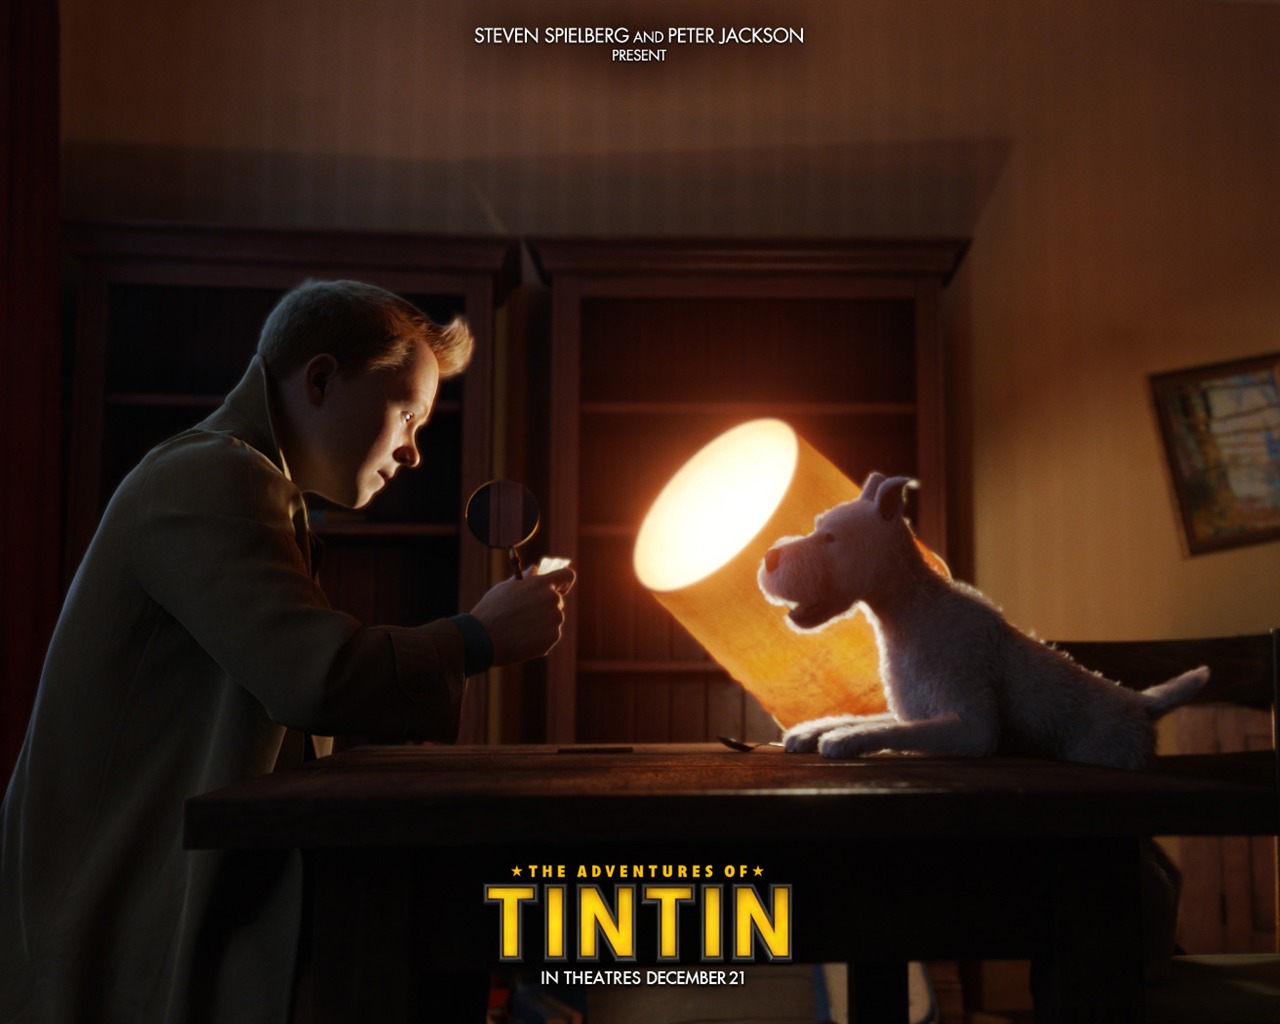 The Adventures of Tintin HD Wallpapers #10 - 1280x1024